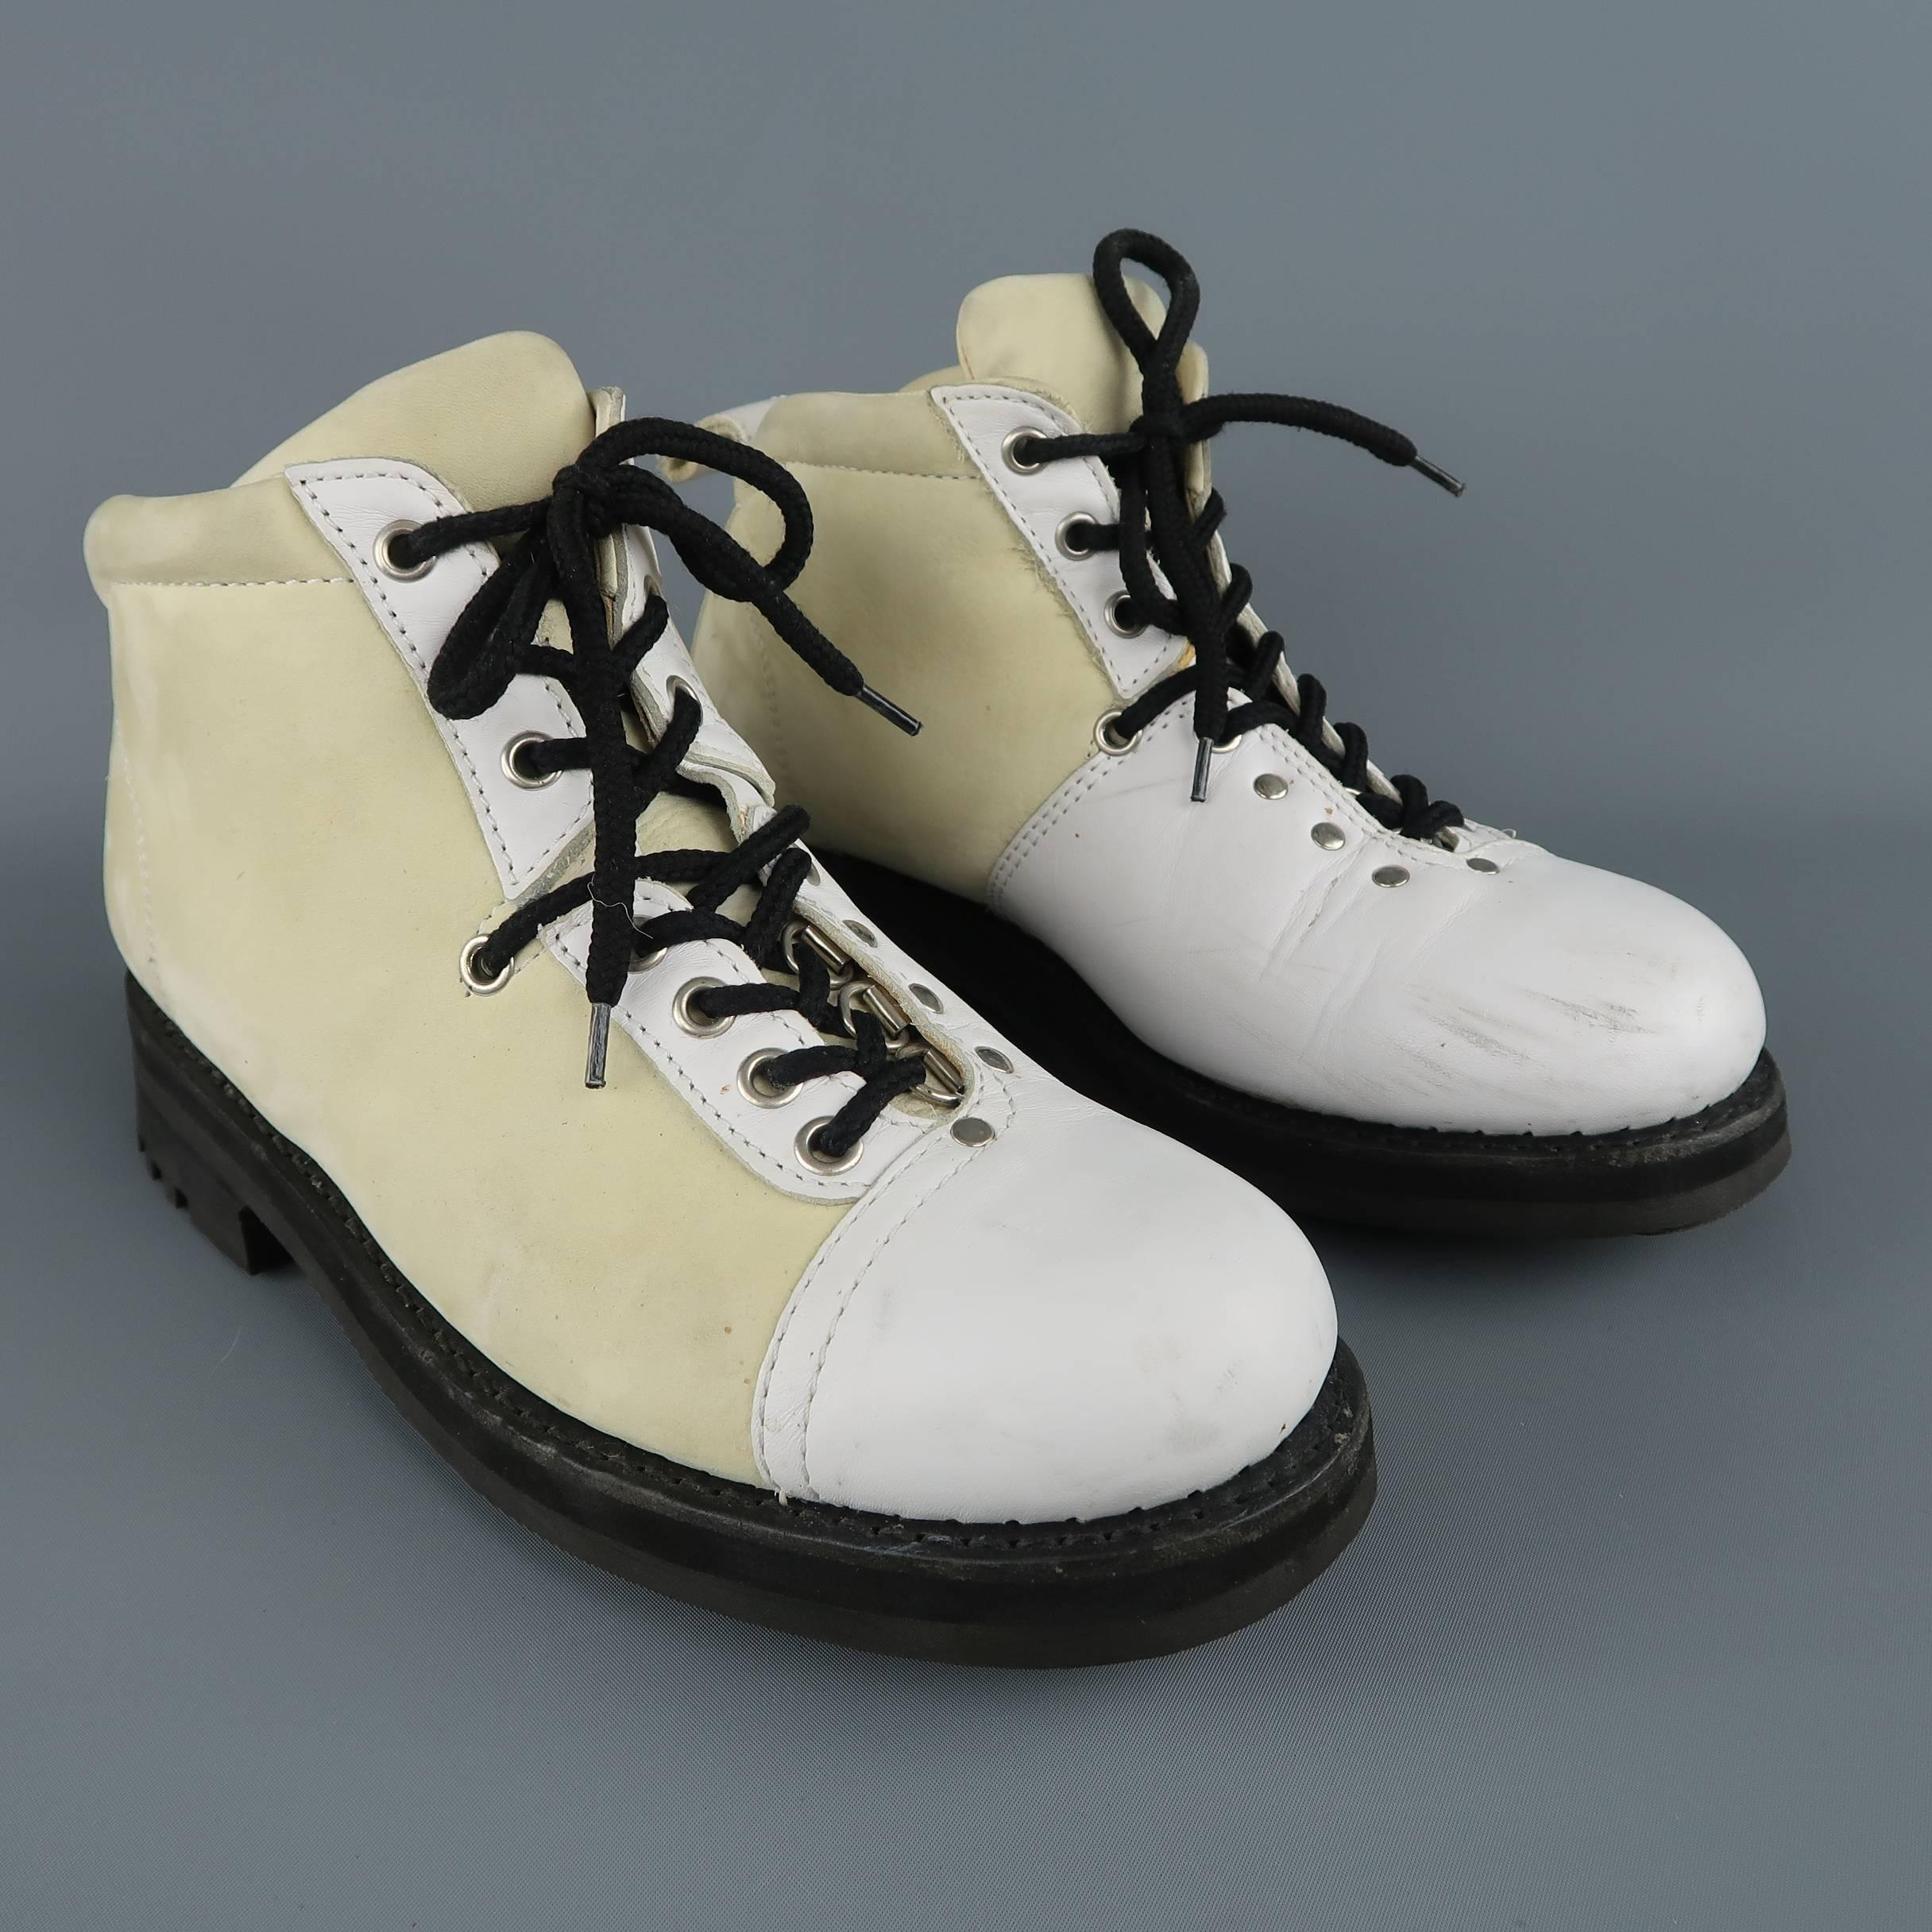 JEAN-BAPTISTE RAUTUREAU boots come in a cream nubuck leather with white smooth leather panels and features a lace up front with silver tone grommets and ski hooks, leather heel loop, and thick commando sole. Scuffs and wear throughout. As-Is. Made